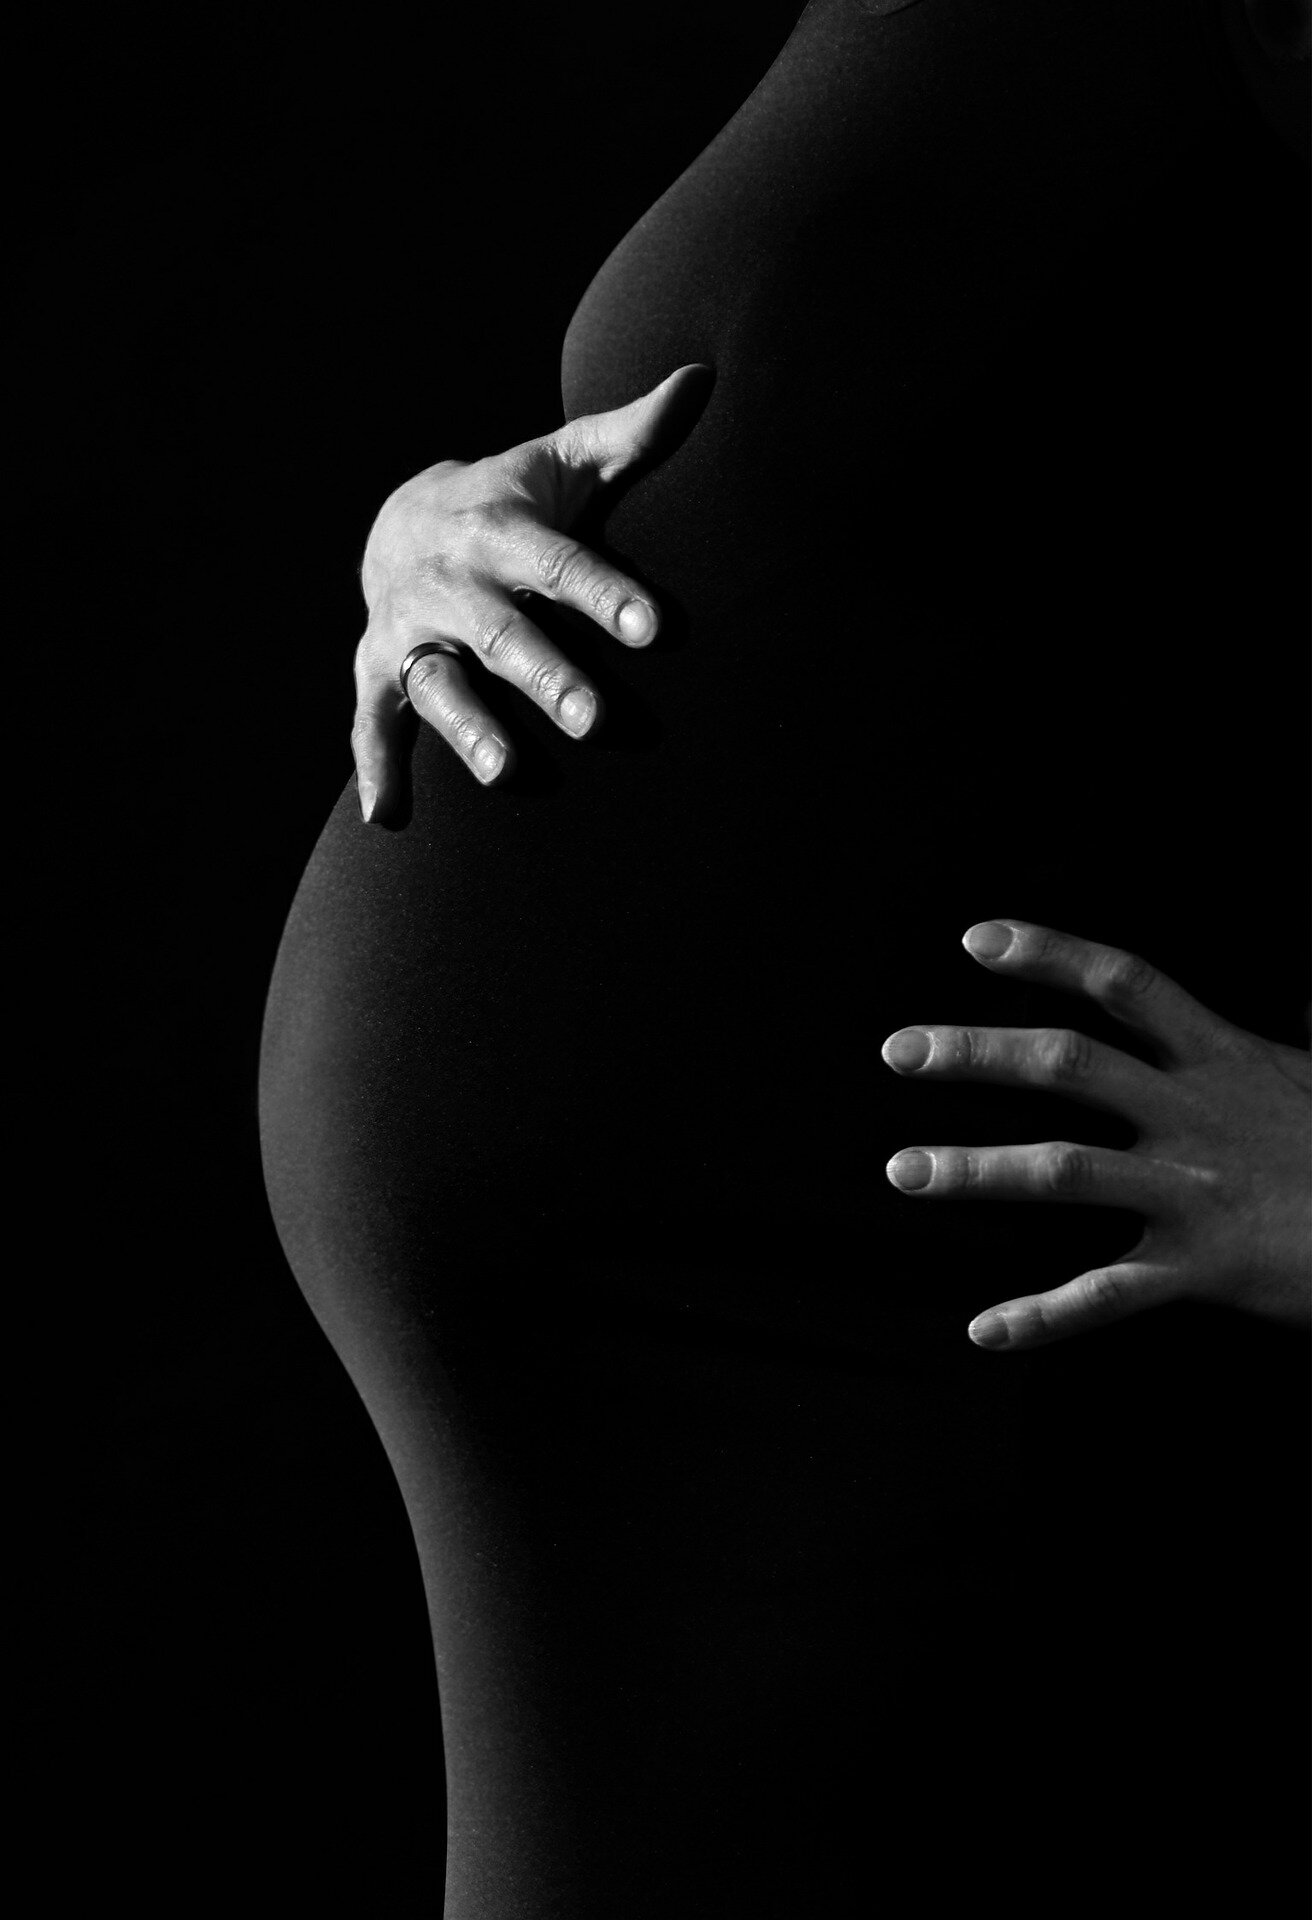 More than 40% of women suffer from constipation during pregnancy and right after childbirth